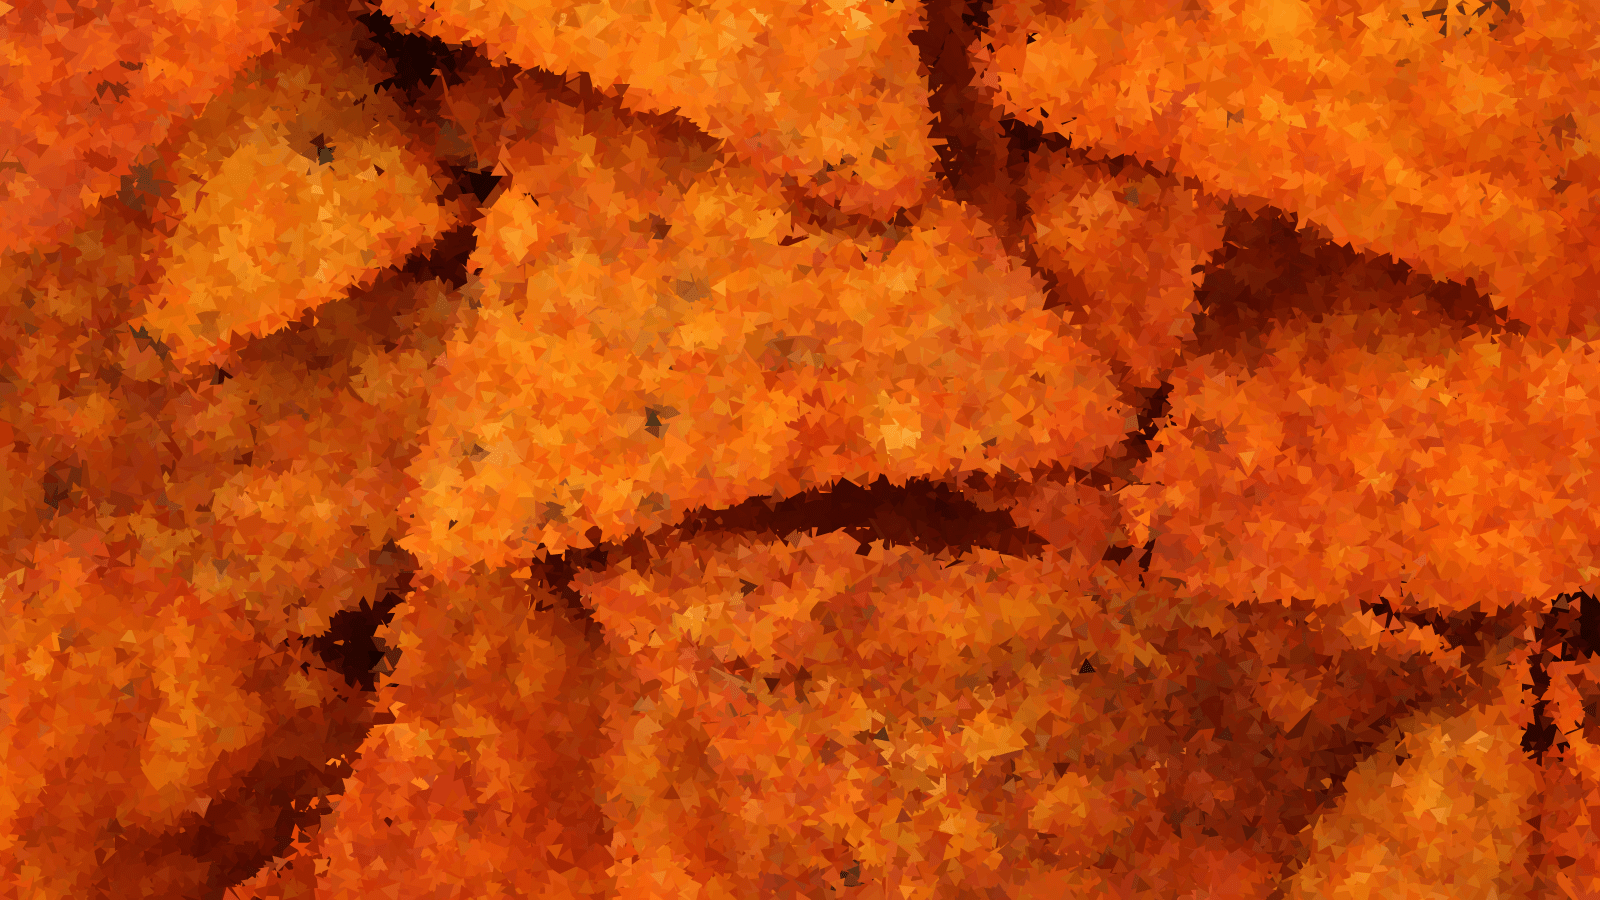 An abstract image of orange and brown leaves - Doritos